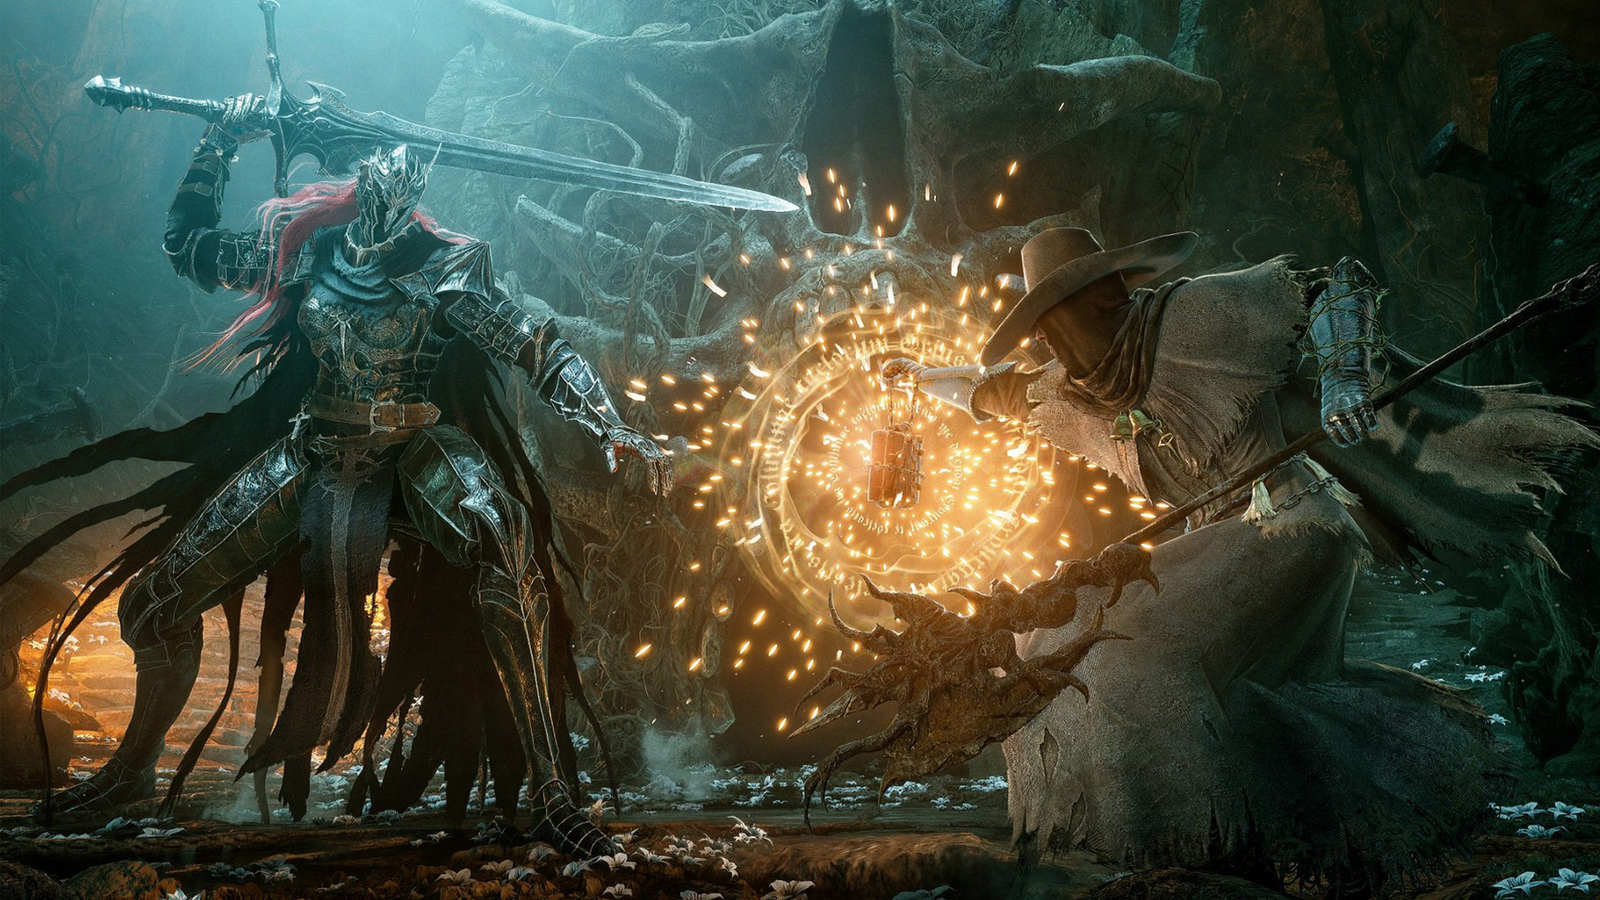 Lords of the Fallen v1.4 patch released with PC fixes and a